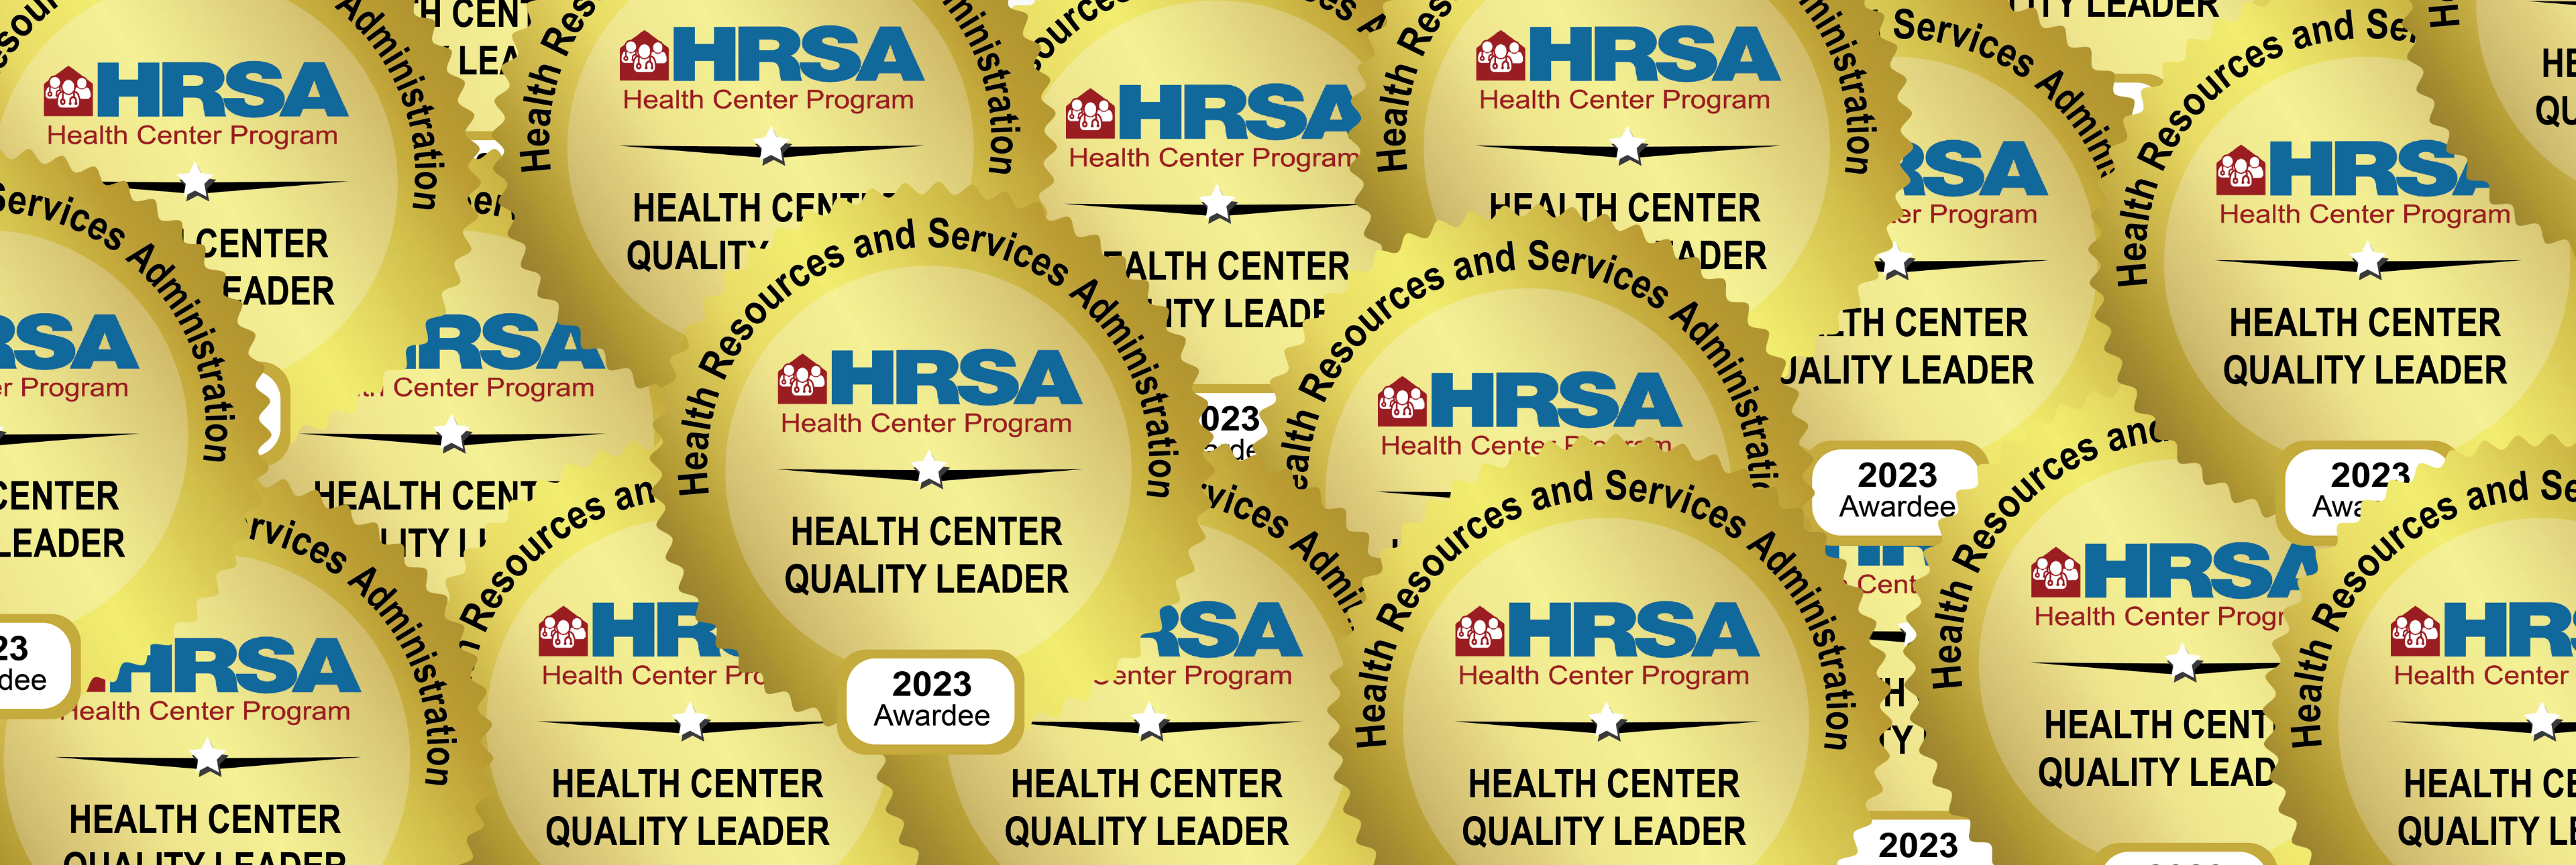 Many overlapping gold seals, all read "HRSA Health Center Quality Leader 2023"